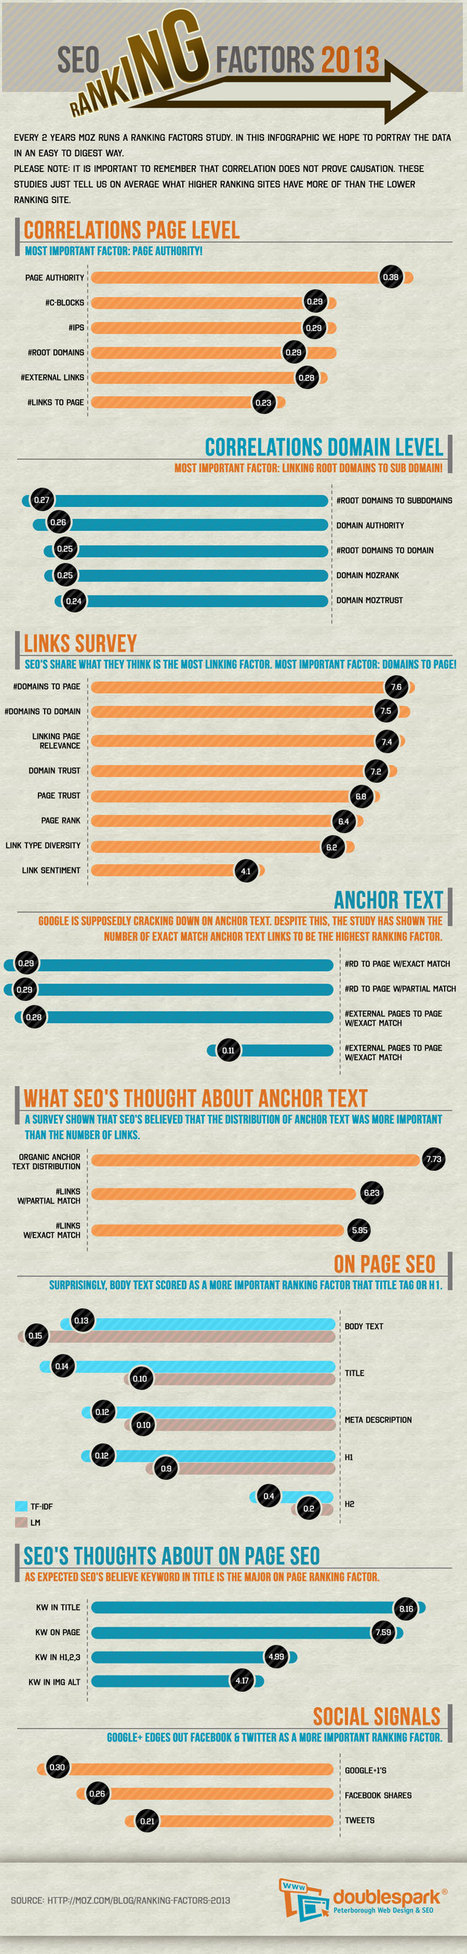 Infographic: Local Search Ranking Factors 2013 by @DavidWallace | SEO & Blogging | Scoop.it